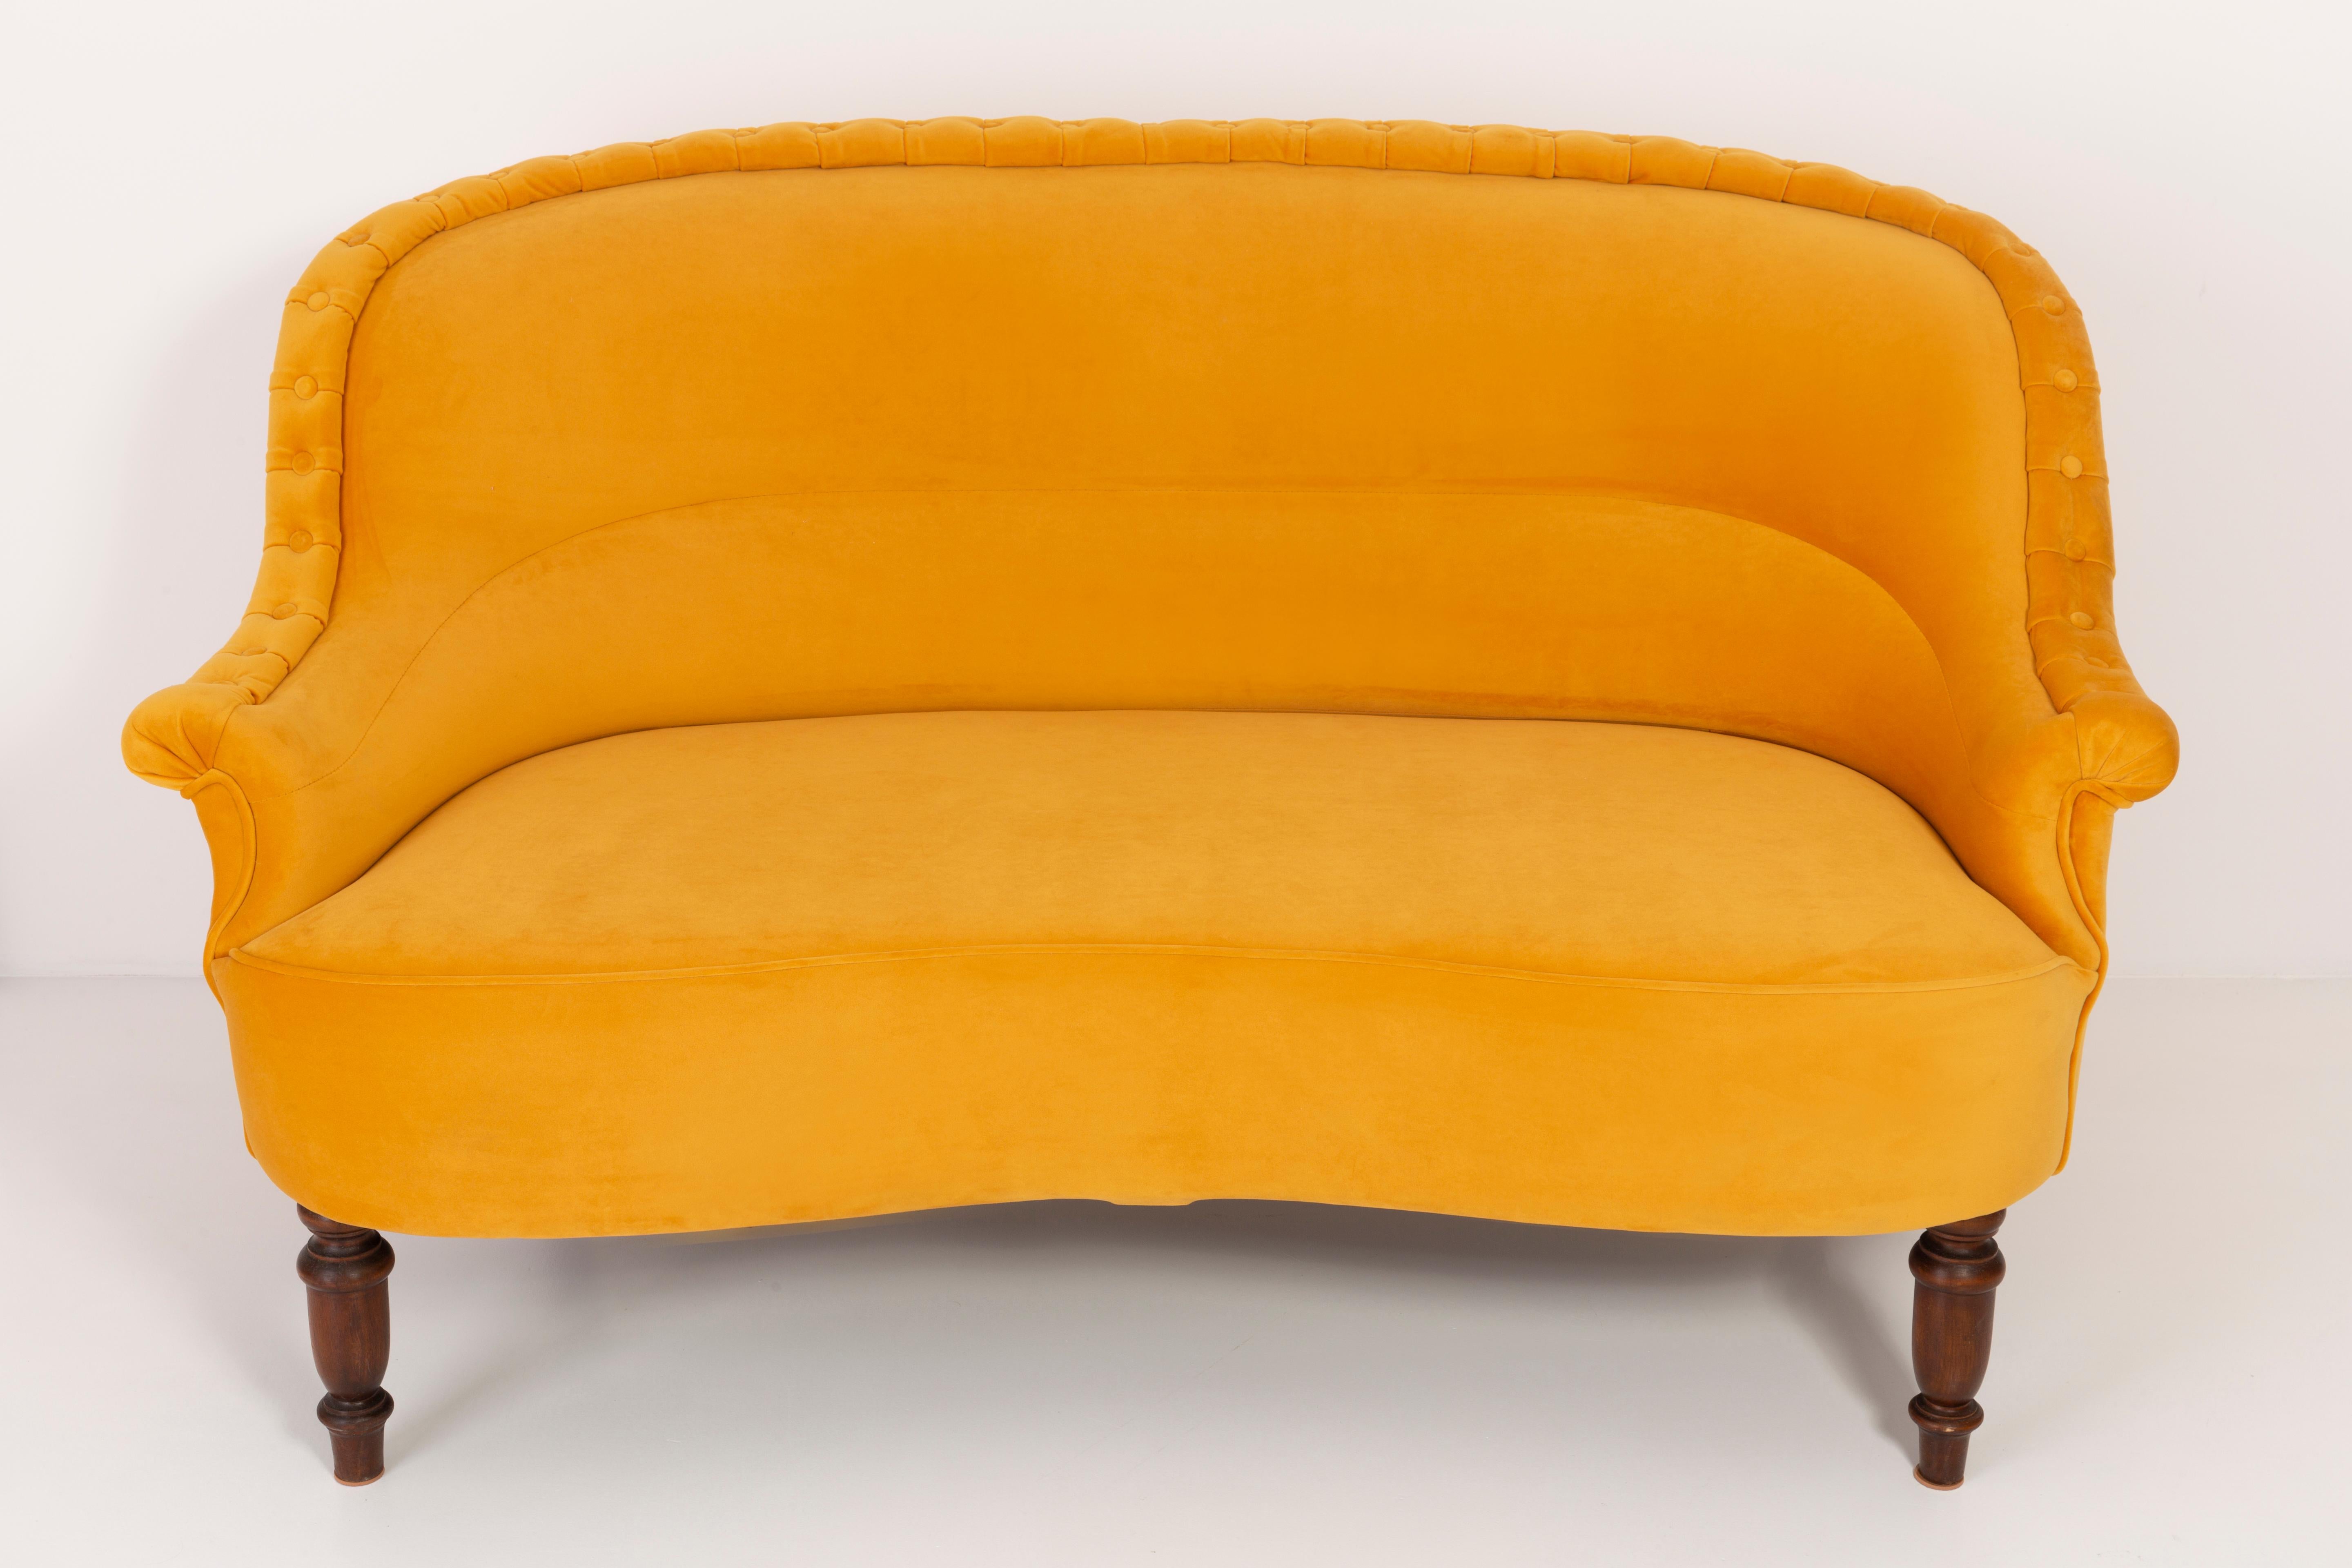 German sofa produced in the 1930s in Berlin. The sofa is after a thorough renovation of upholstery and carpentry. The wooden legs are thoroughly cleaned and covered with a semi-matte varnish in the color of a nut. The upholstery is made of high